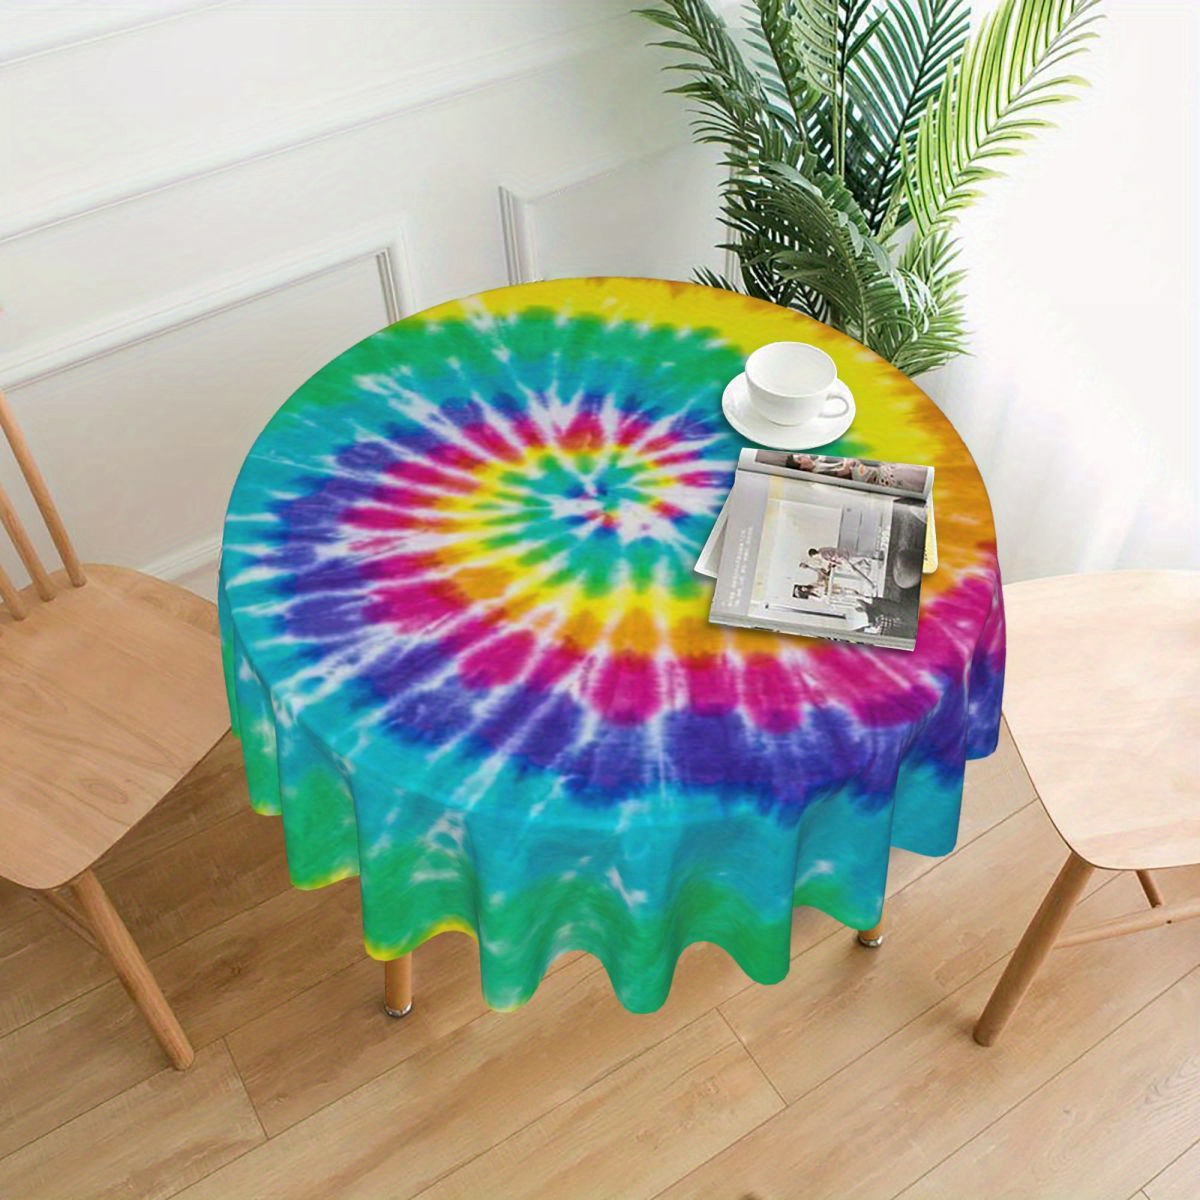 

Jit Tie-dye Spiral Pattern Round Tablecloth - Machine-made Woven Polyester Cover, Stain-resistant Washable Fine Fiber Table Cover For Kitchen Dining Party Decor, Home Restaurant Festive Gift